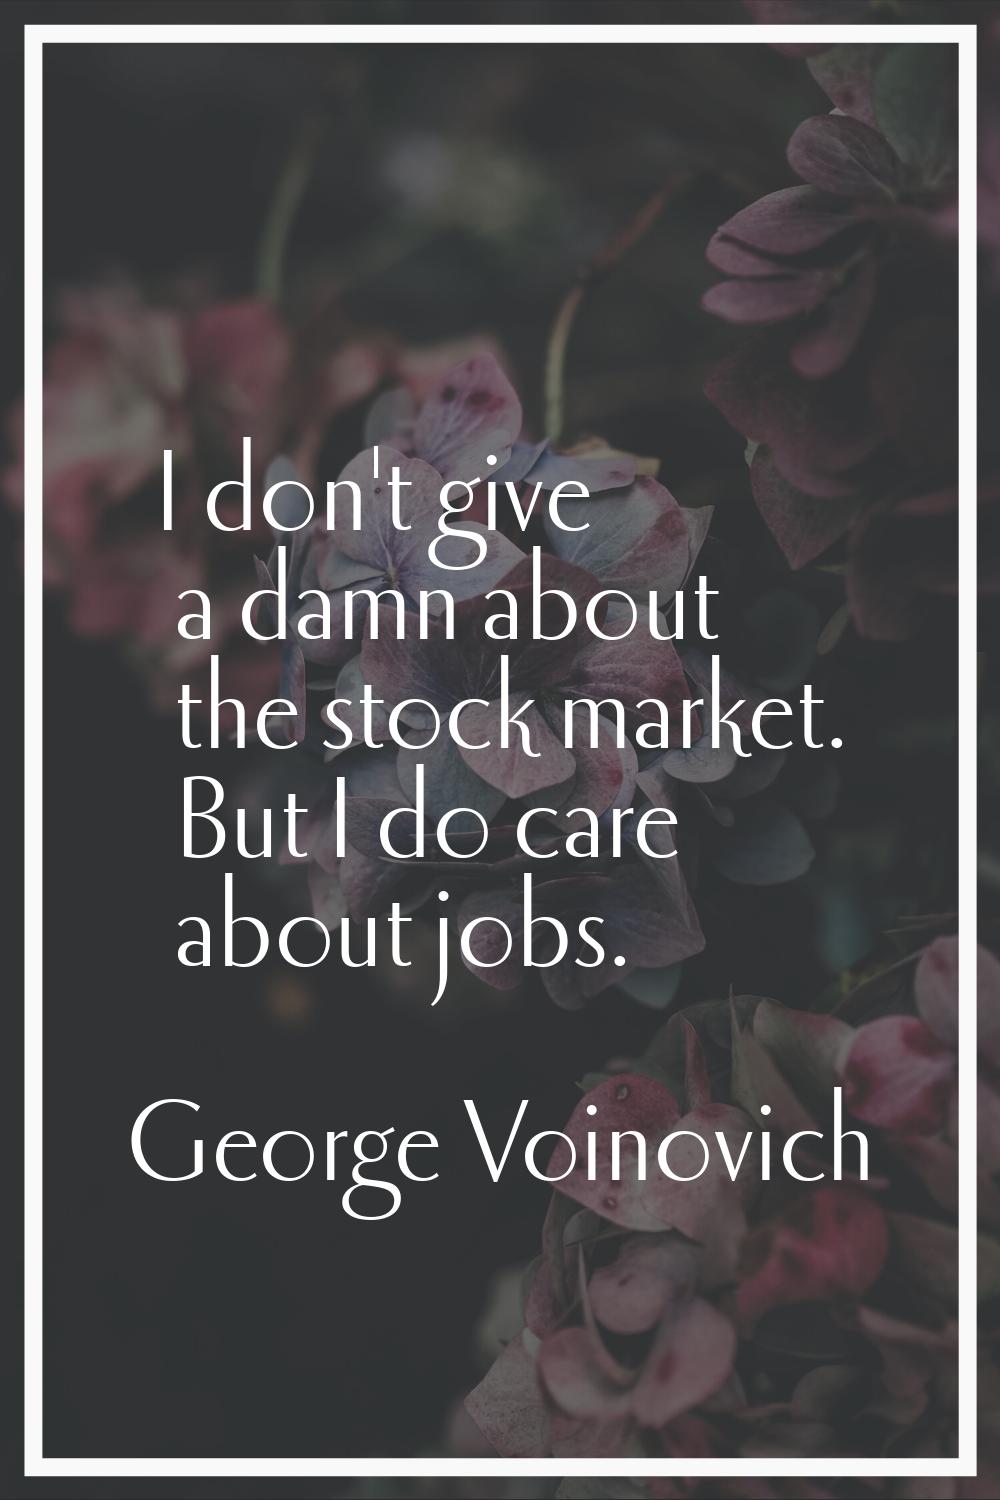 I don't give a damn about the stock market. But I do care about jobs.